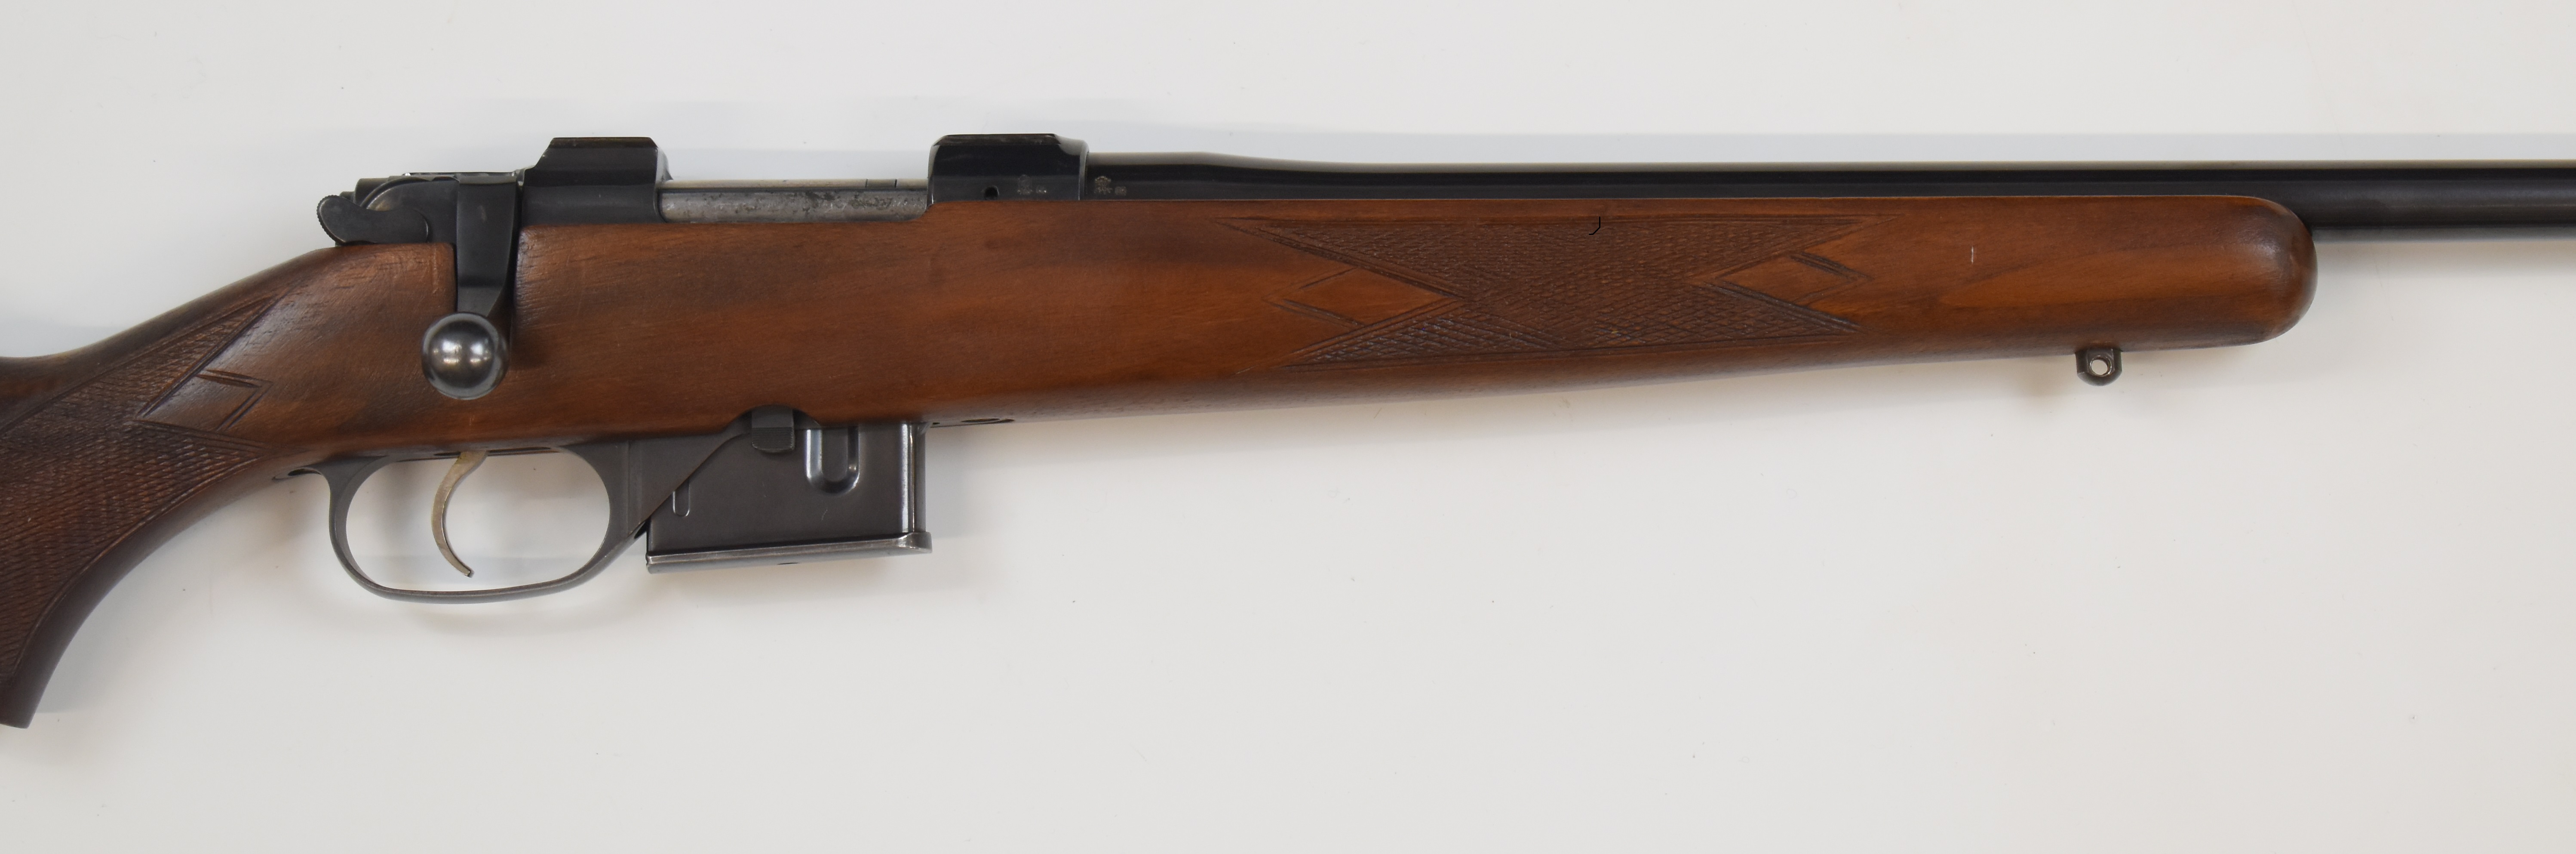 CZ 527 American .222 Remington bolt-action rifle with chequered semi-pistol grip and forend, sling - Image 4 of 10